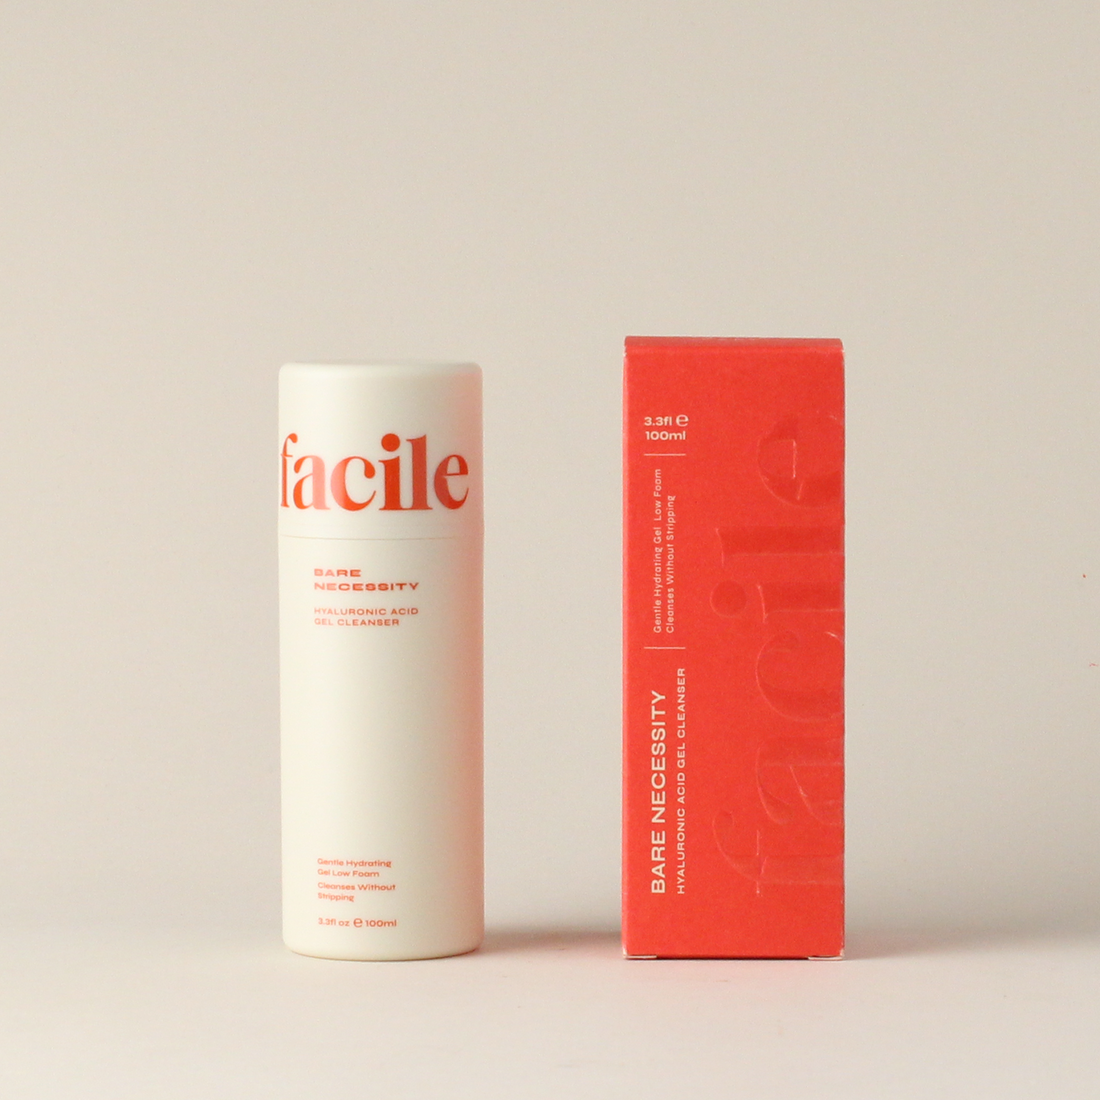 Bare Necessity Gentle Gel Cleanser by Facile